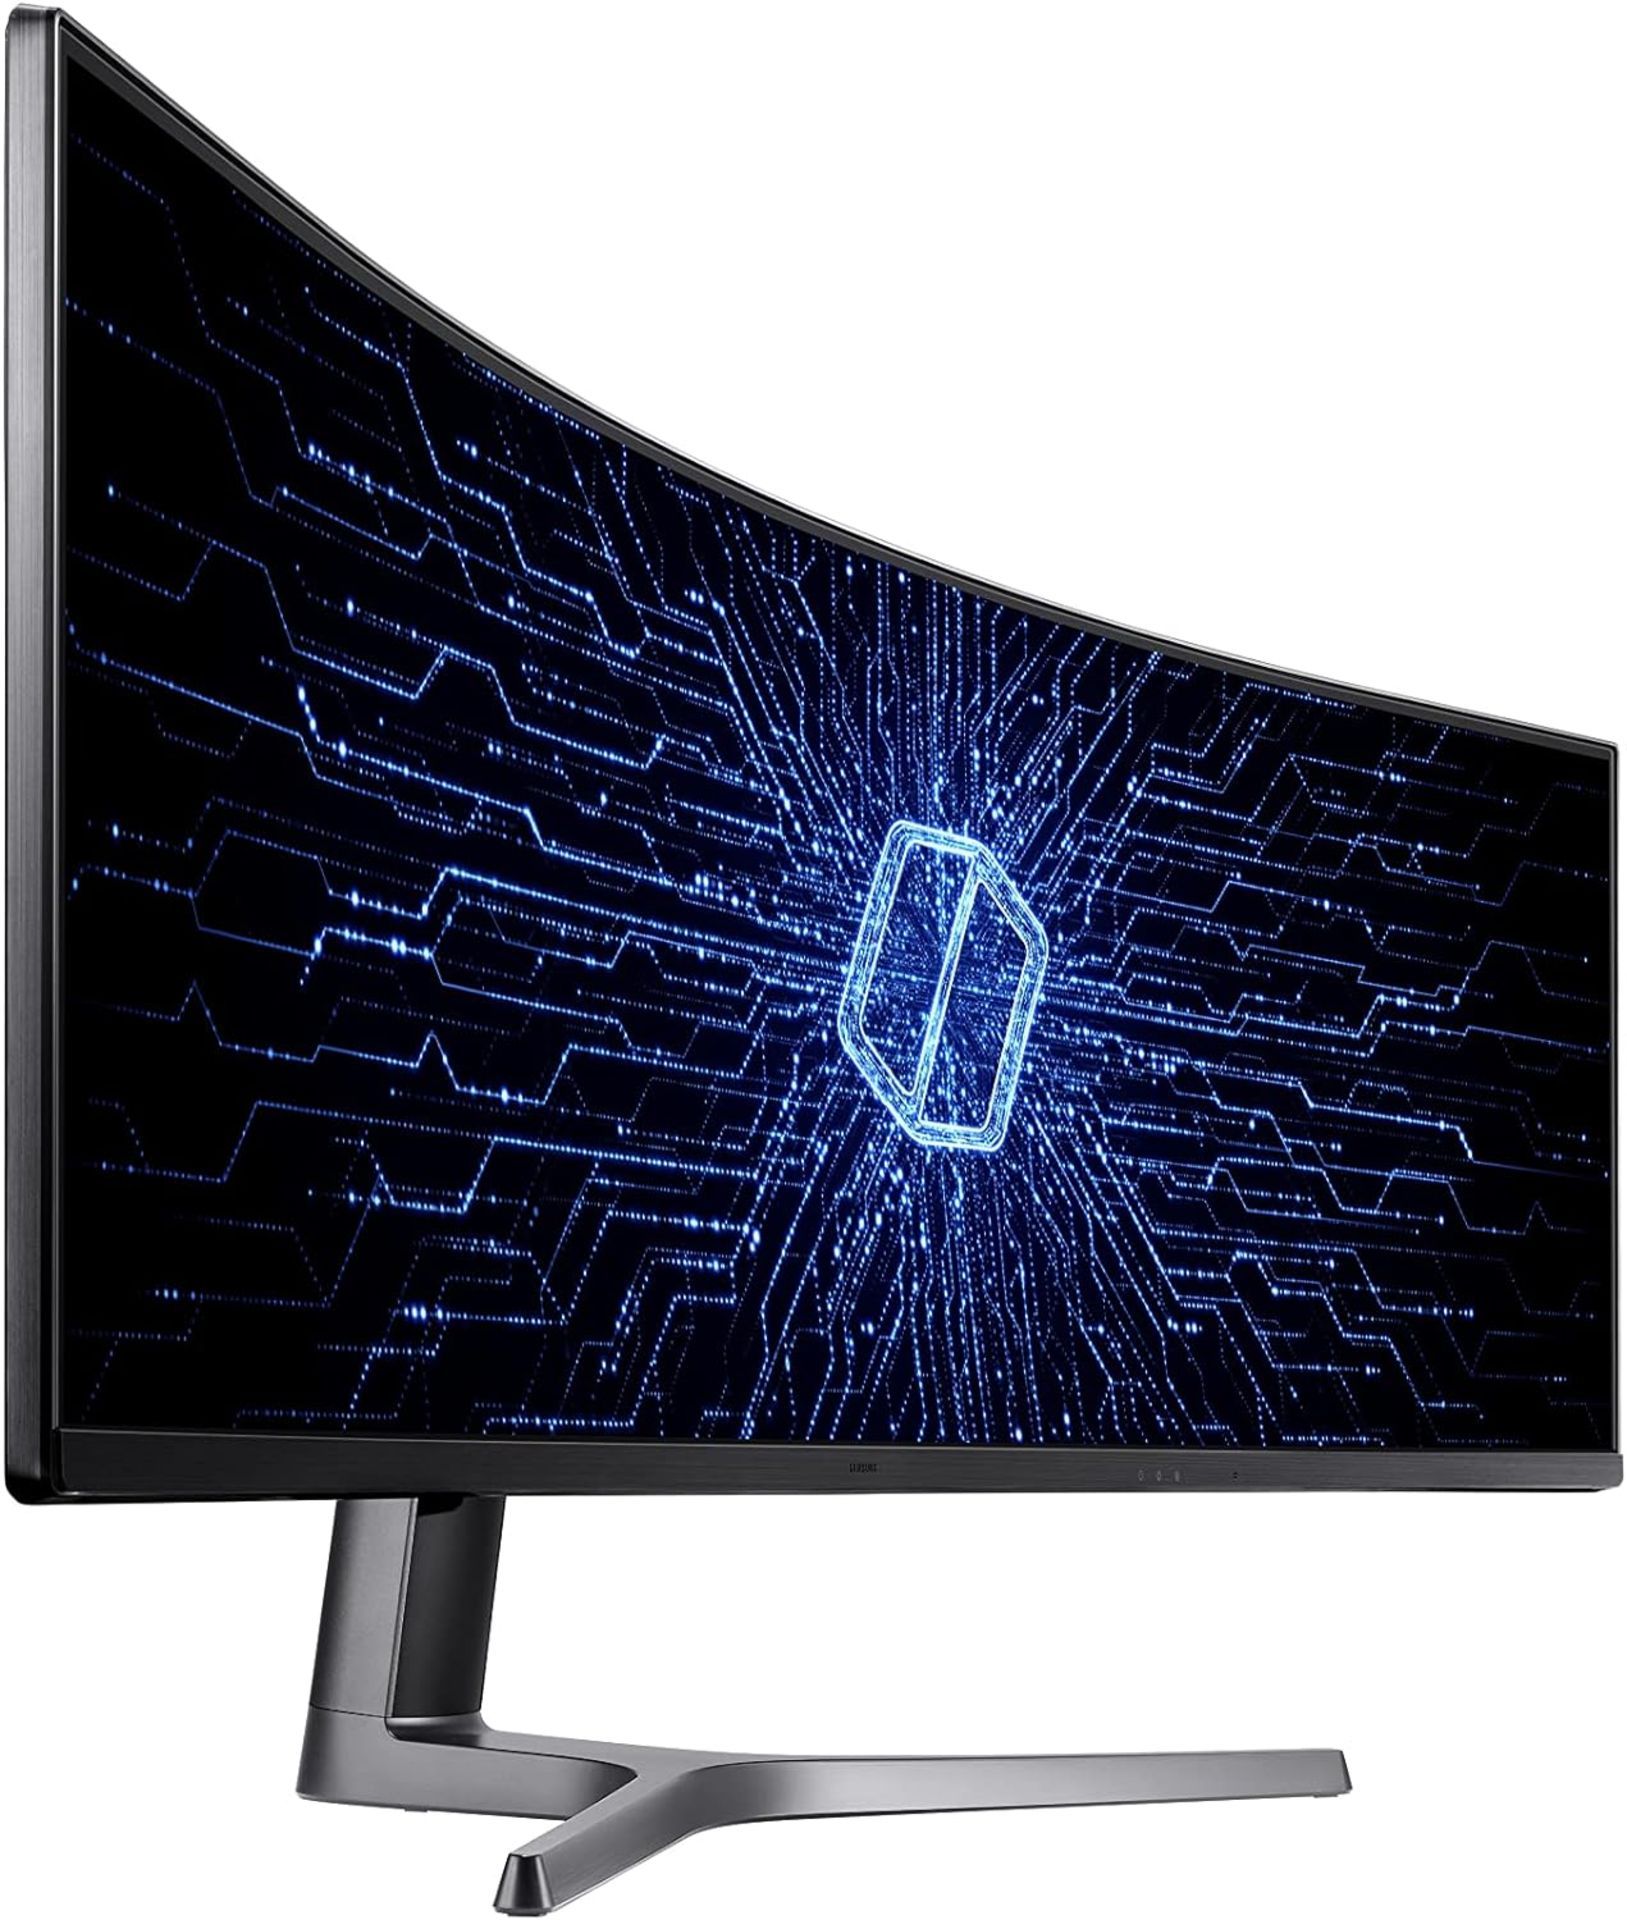 BRAND NEW FACTORY SEALED SAMSUNG CRG9 49 Inch Ultra-Wide Dual-QHD 120Hz Odyssey Monitor. RRP £1249. - Image 2 of 6